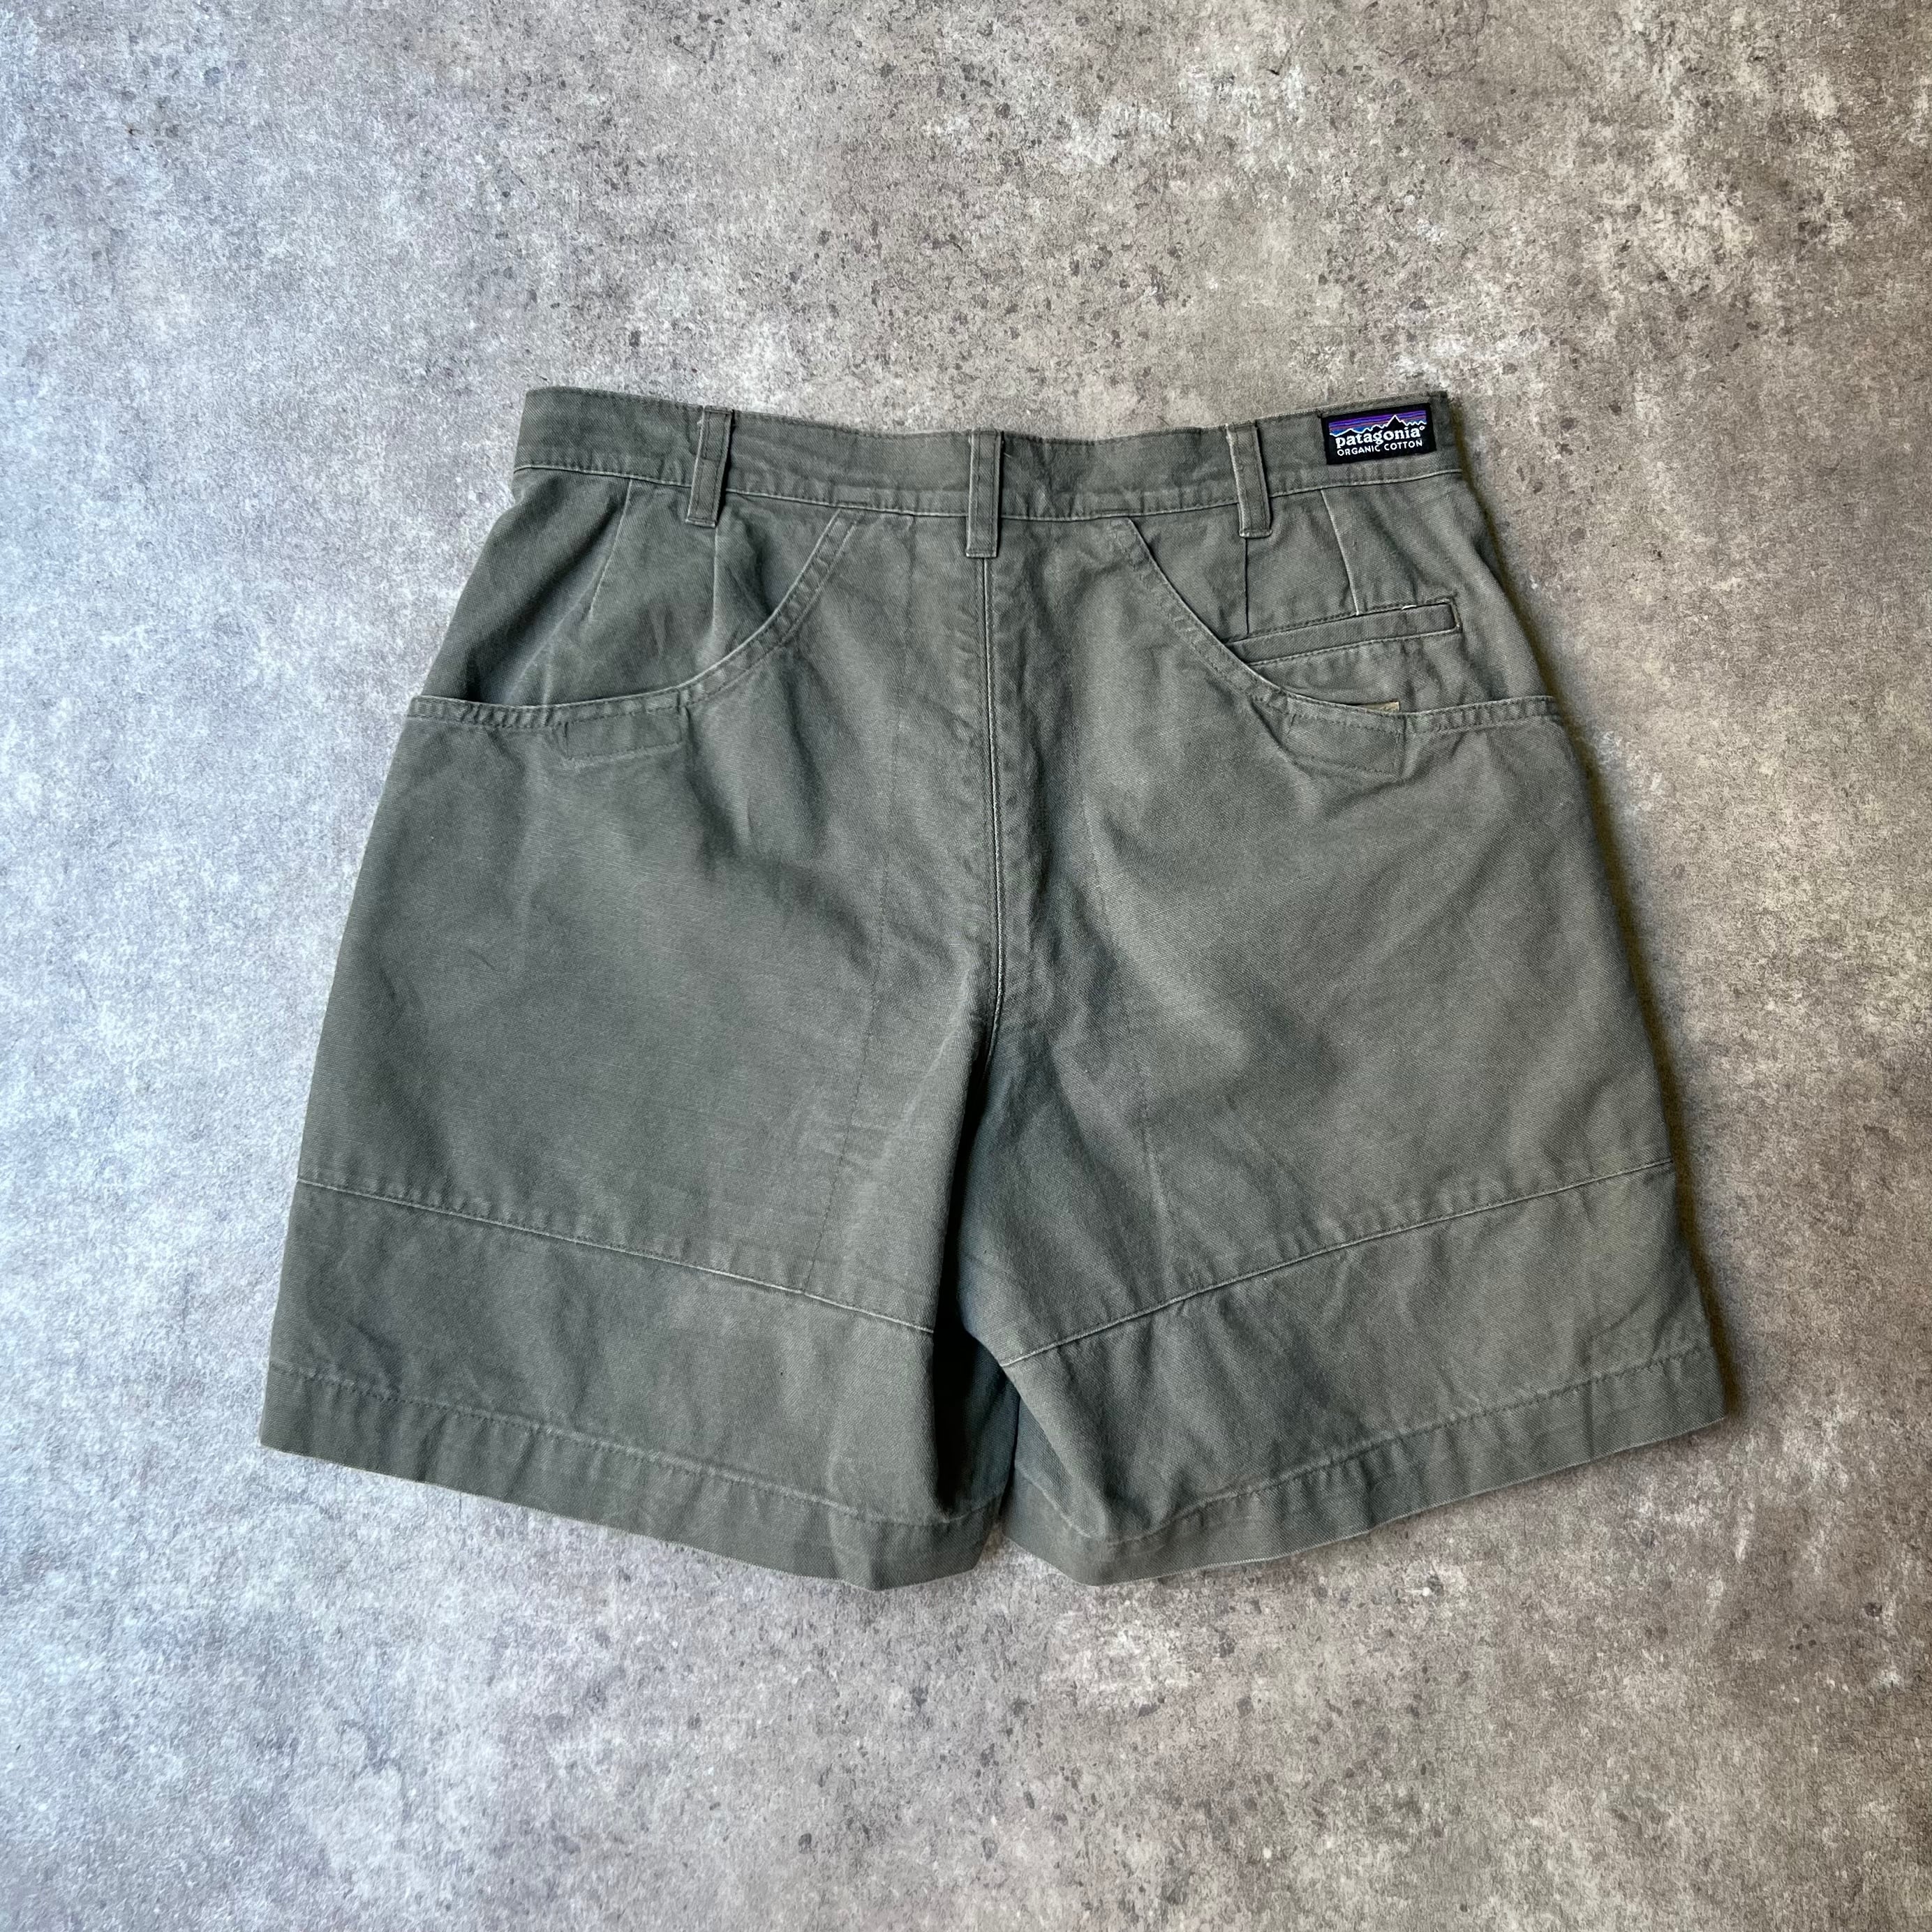 90s Patagonia stand up shorts